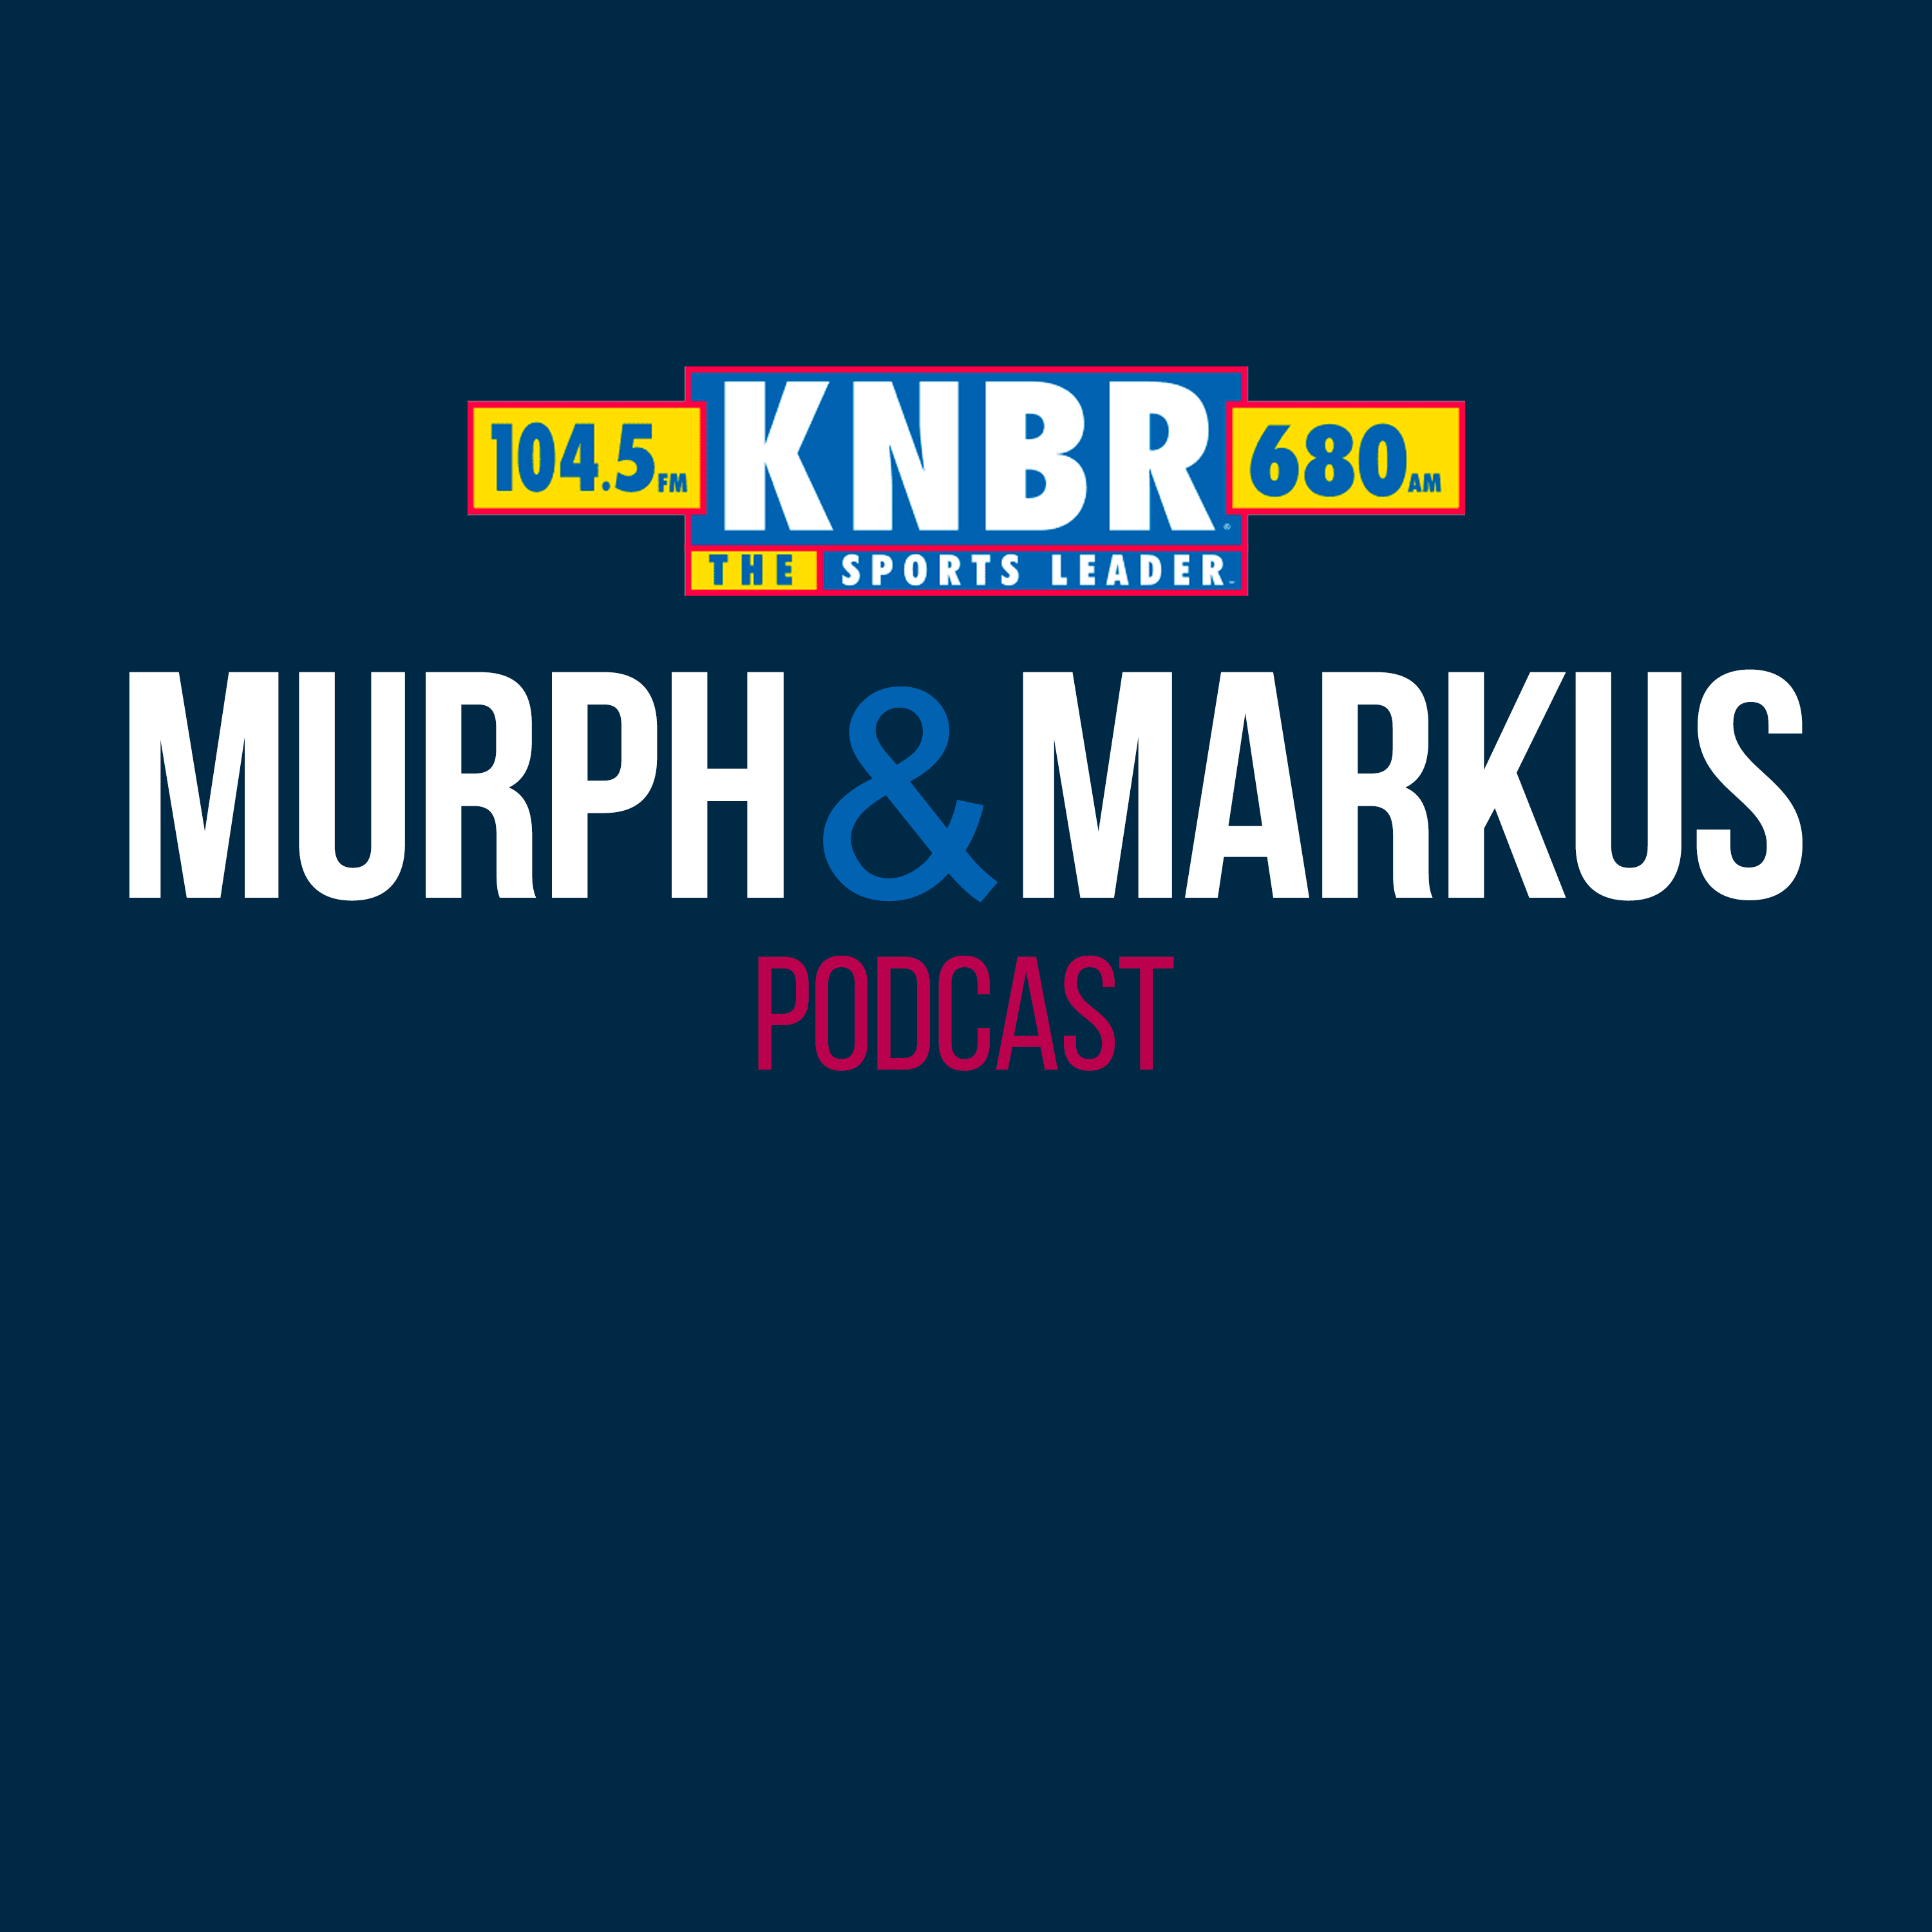 7-12 Sergio Romo stops by Murph and Markus to discuss what this weekend means to him and why he thanks the other members of the Core 4